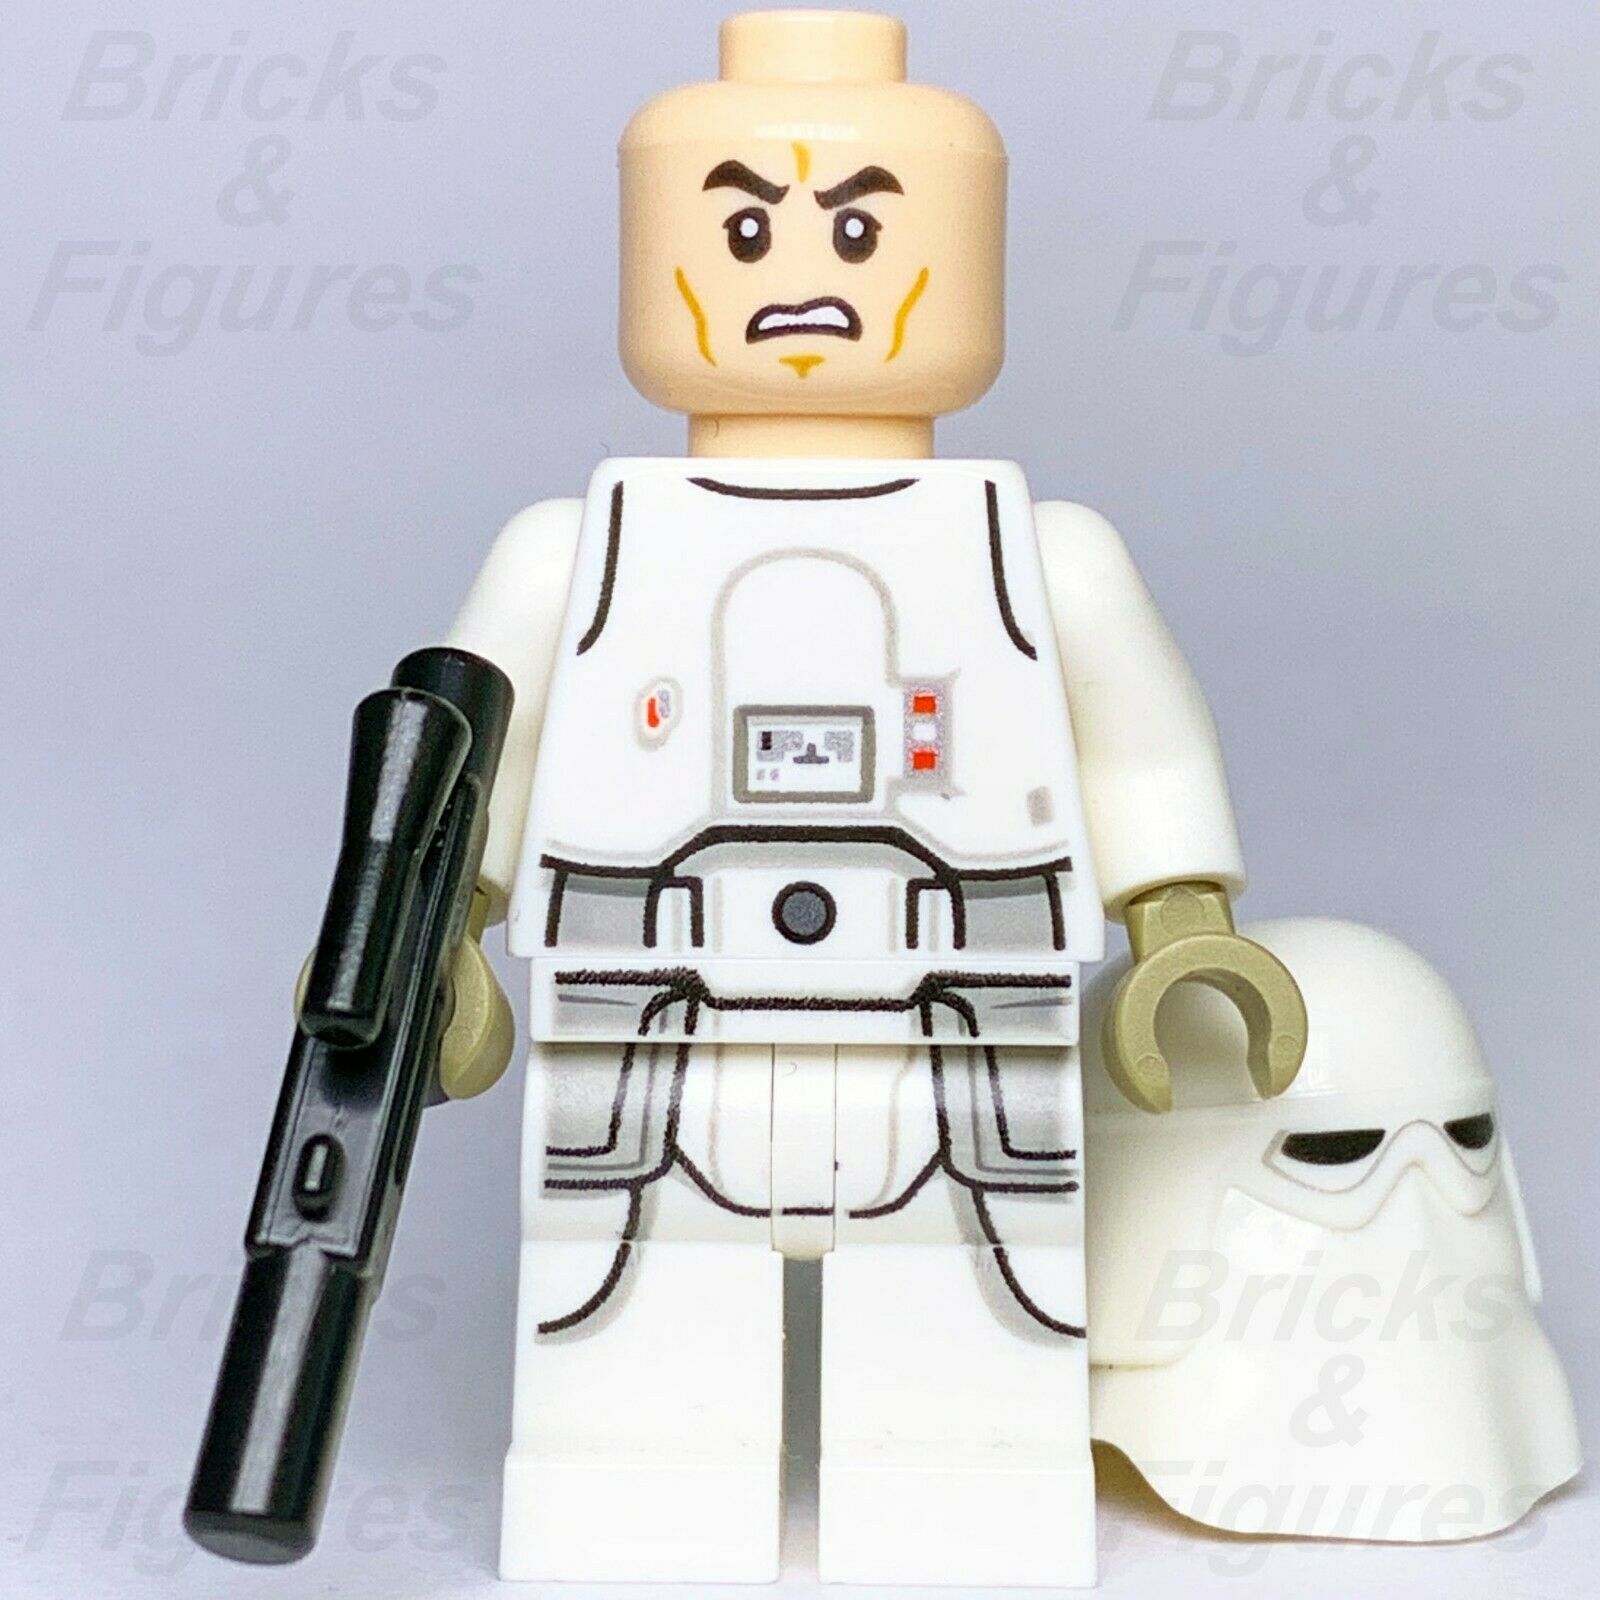 New Star Wars LEGO Hoth Snowtrooper Imperial Minifigure from Sets 75241 75239 - Bricks & Figures